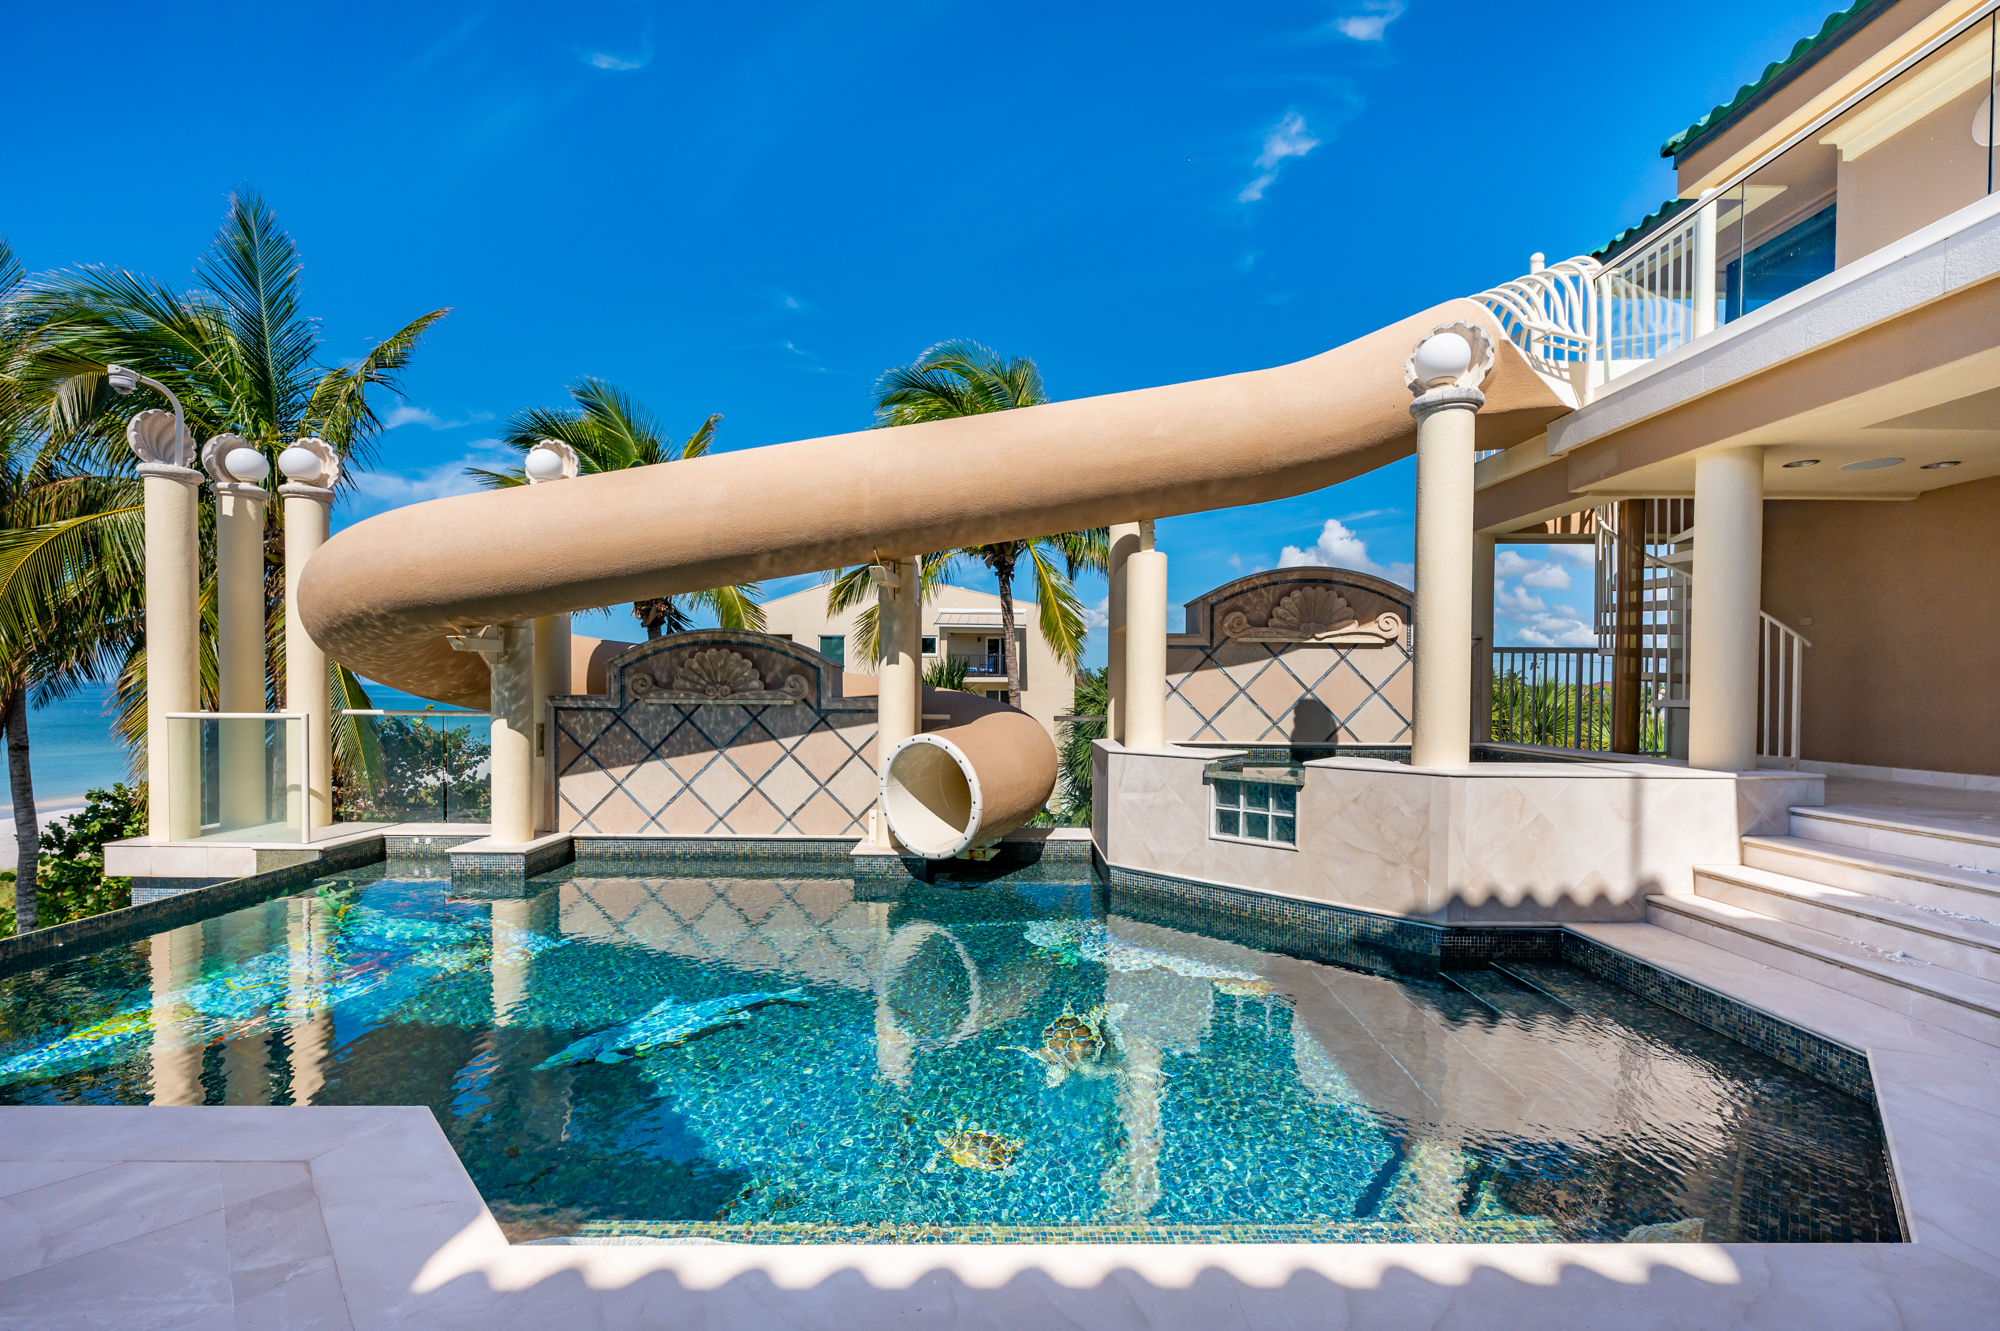 The waterslide leads from the rooftop down to the saltwater-filled infinity edge pool. (Courtesy photo)